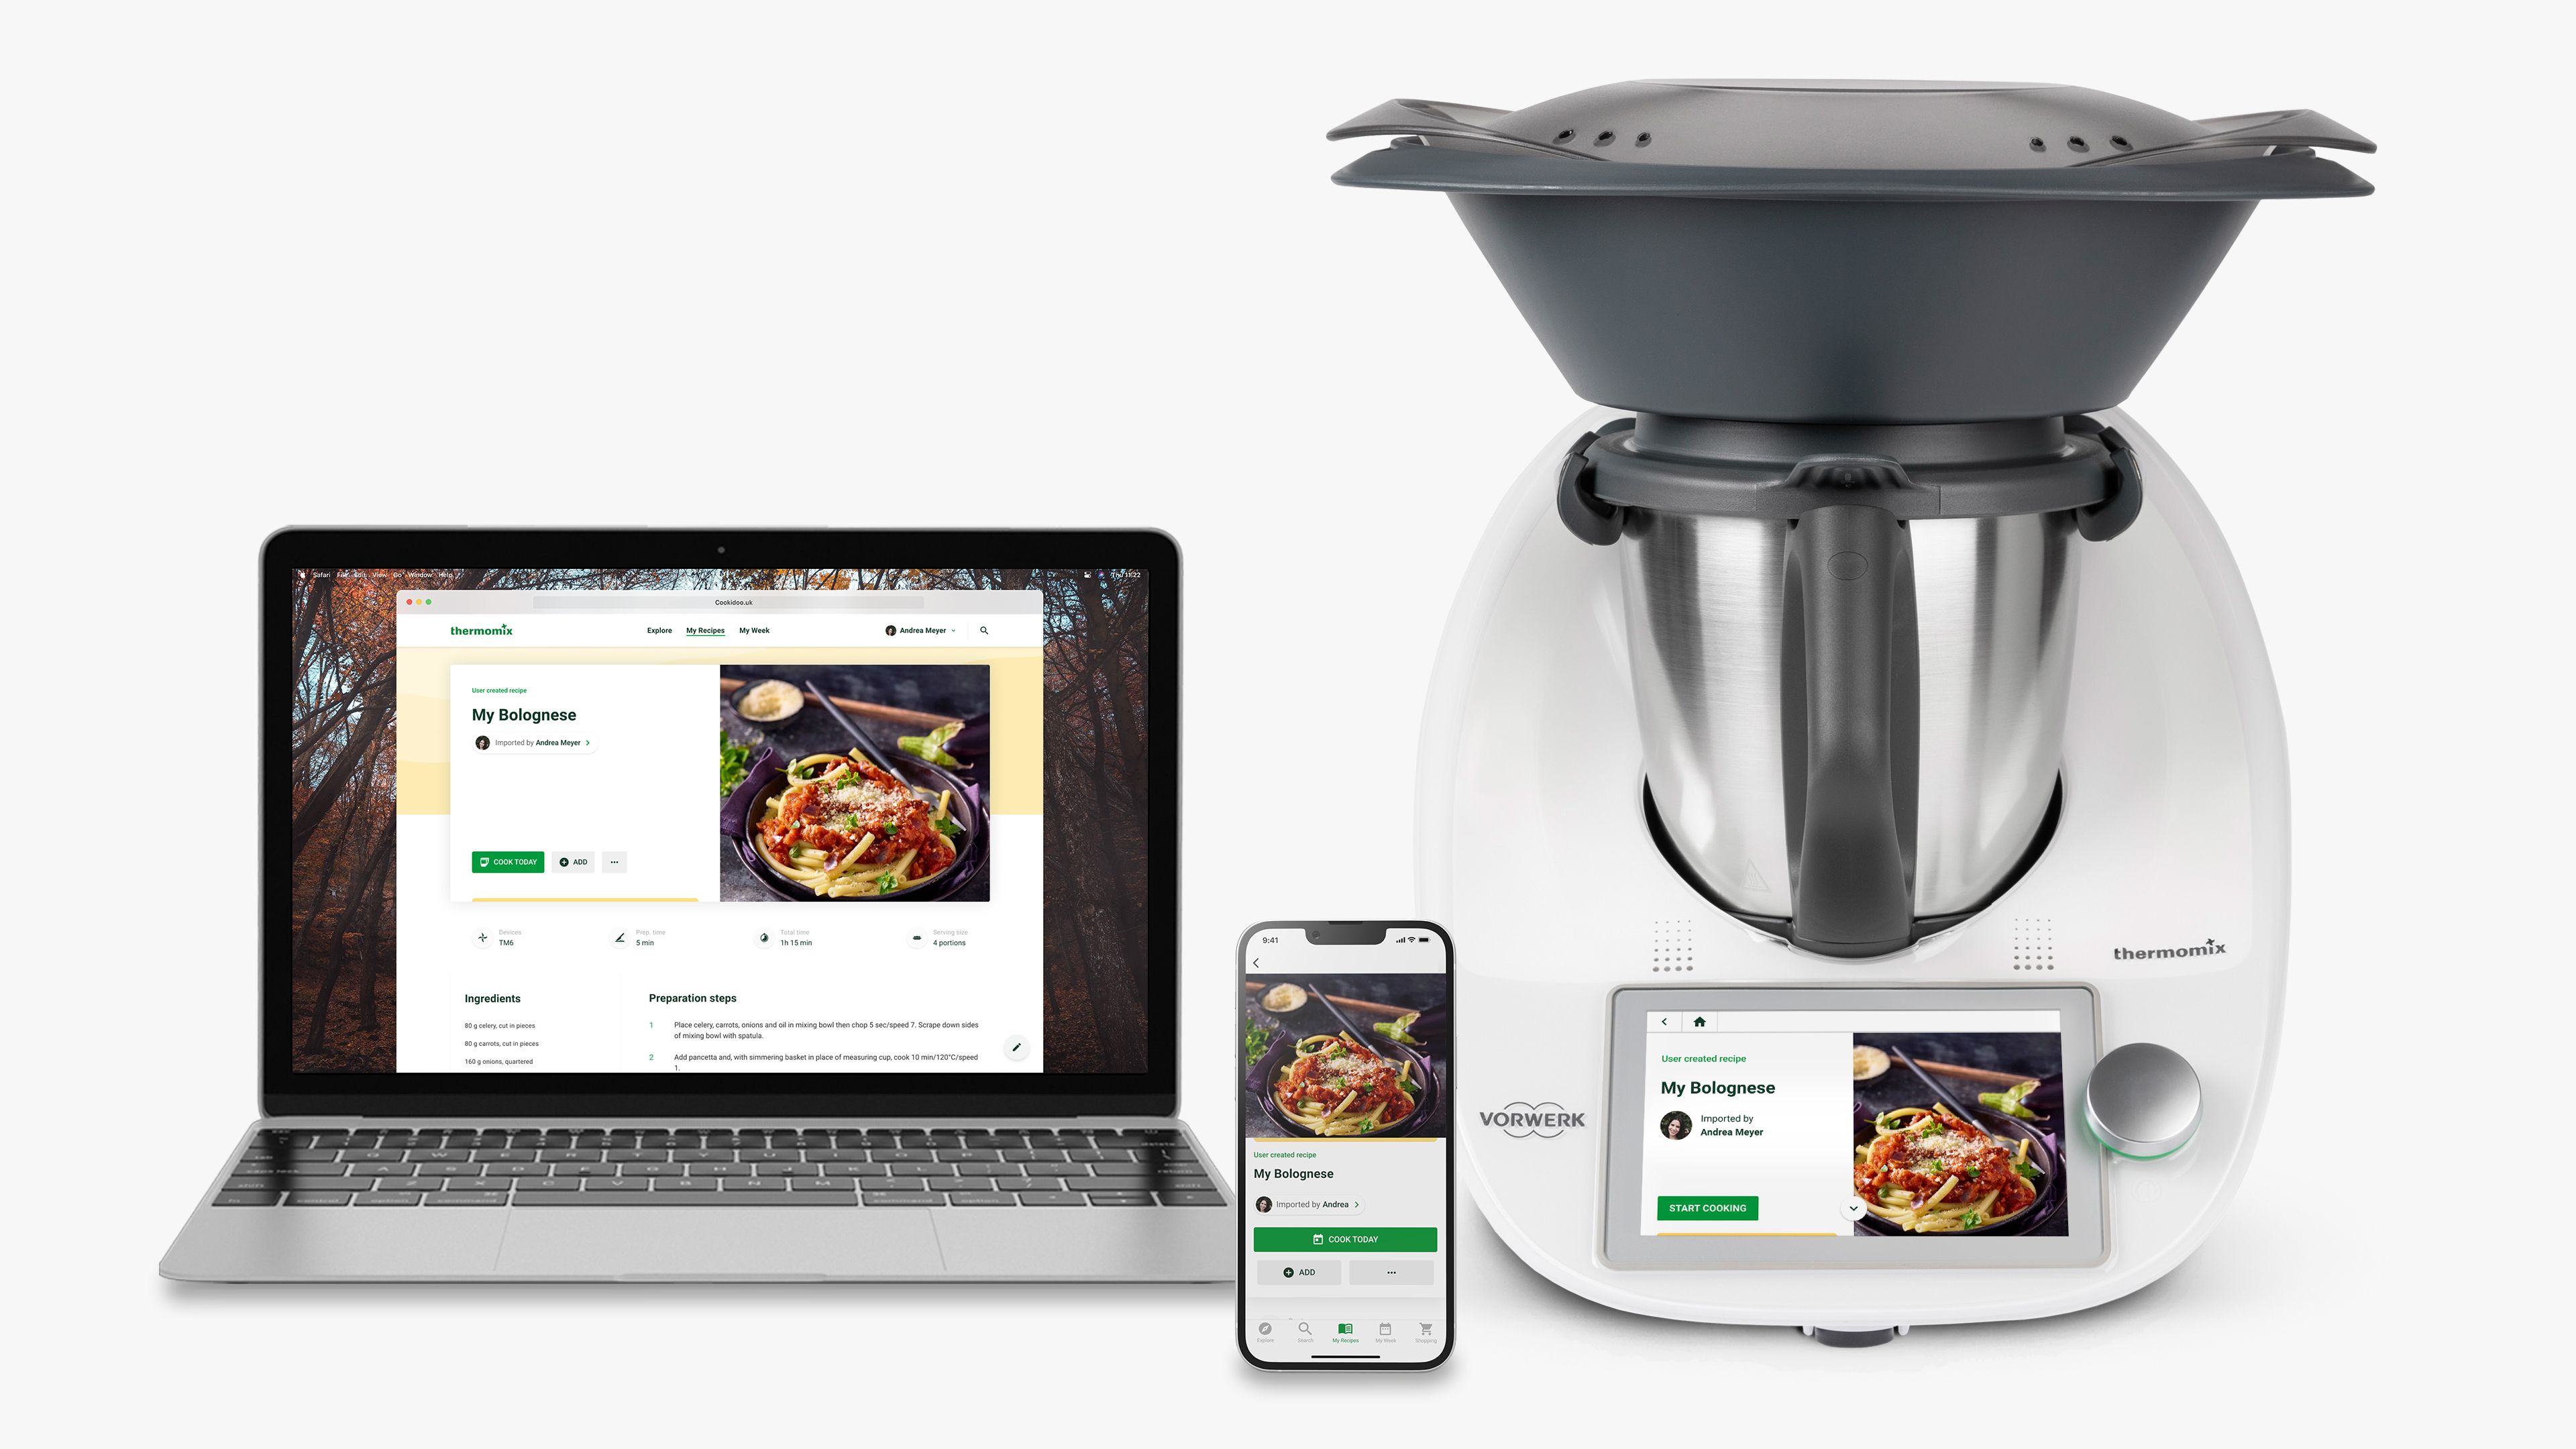 Uova sode - Cookidoo® – the official Thermomix® recipe platform